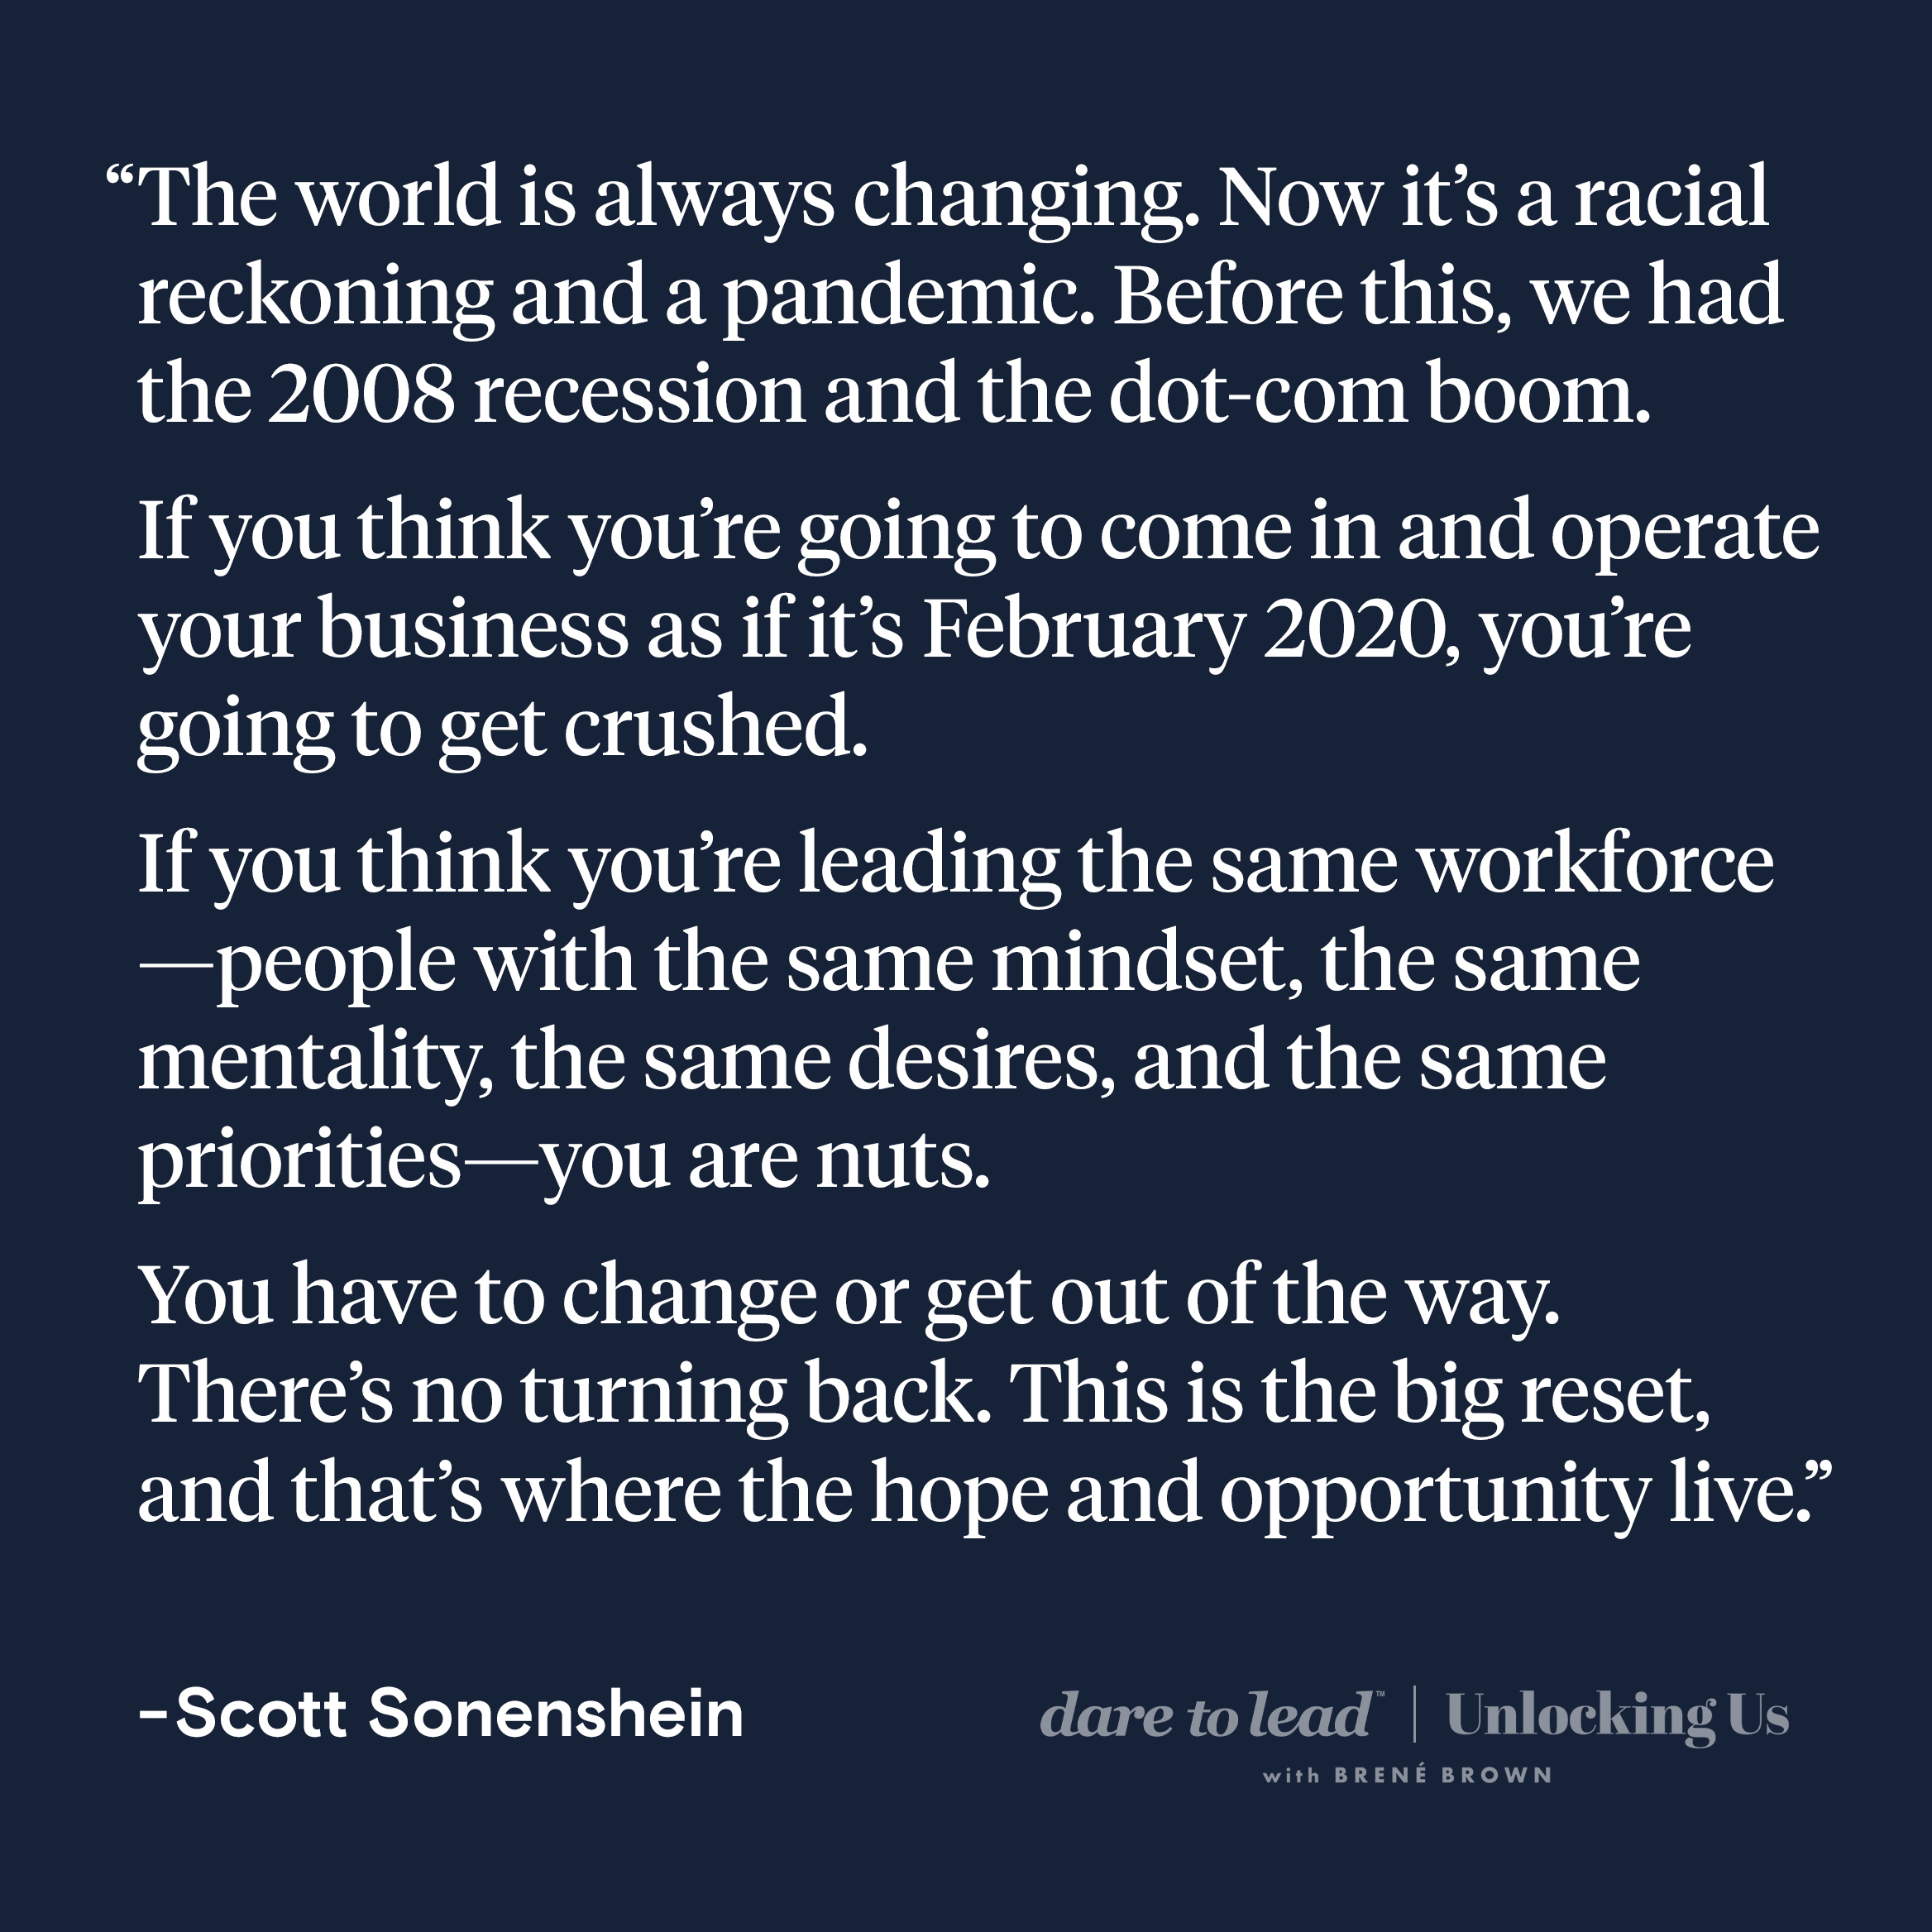 The world is always changing. Now it’s a racial reckoning and a pandemic. Before this, we had the 2008 recession and the dot-com boom. If you think you’re going to come in and operate your business as if it’s February 2020, you’re going to get crushed. If you think you’re leading the same workforce—people with the same mindset, the same mentality, the same desires, and the same priorities—you are nuts. You have to change or get out of the way. There’s no turning back. This is the big reset, and that’s where the hope and opportunity live.